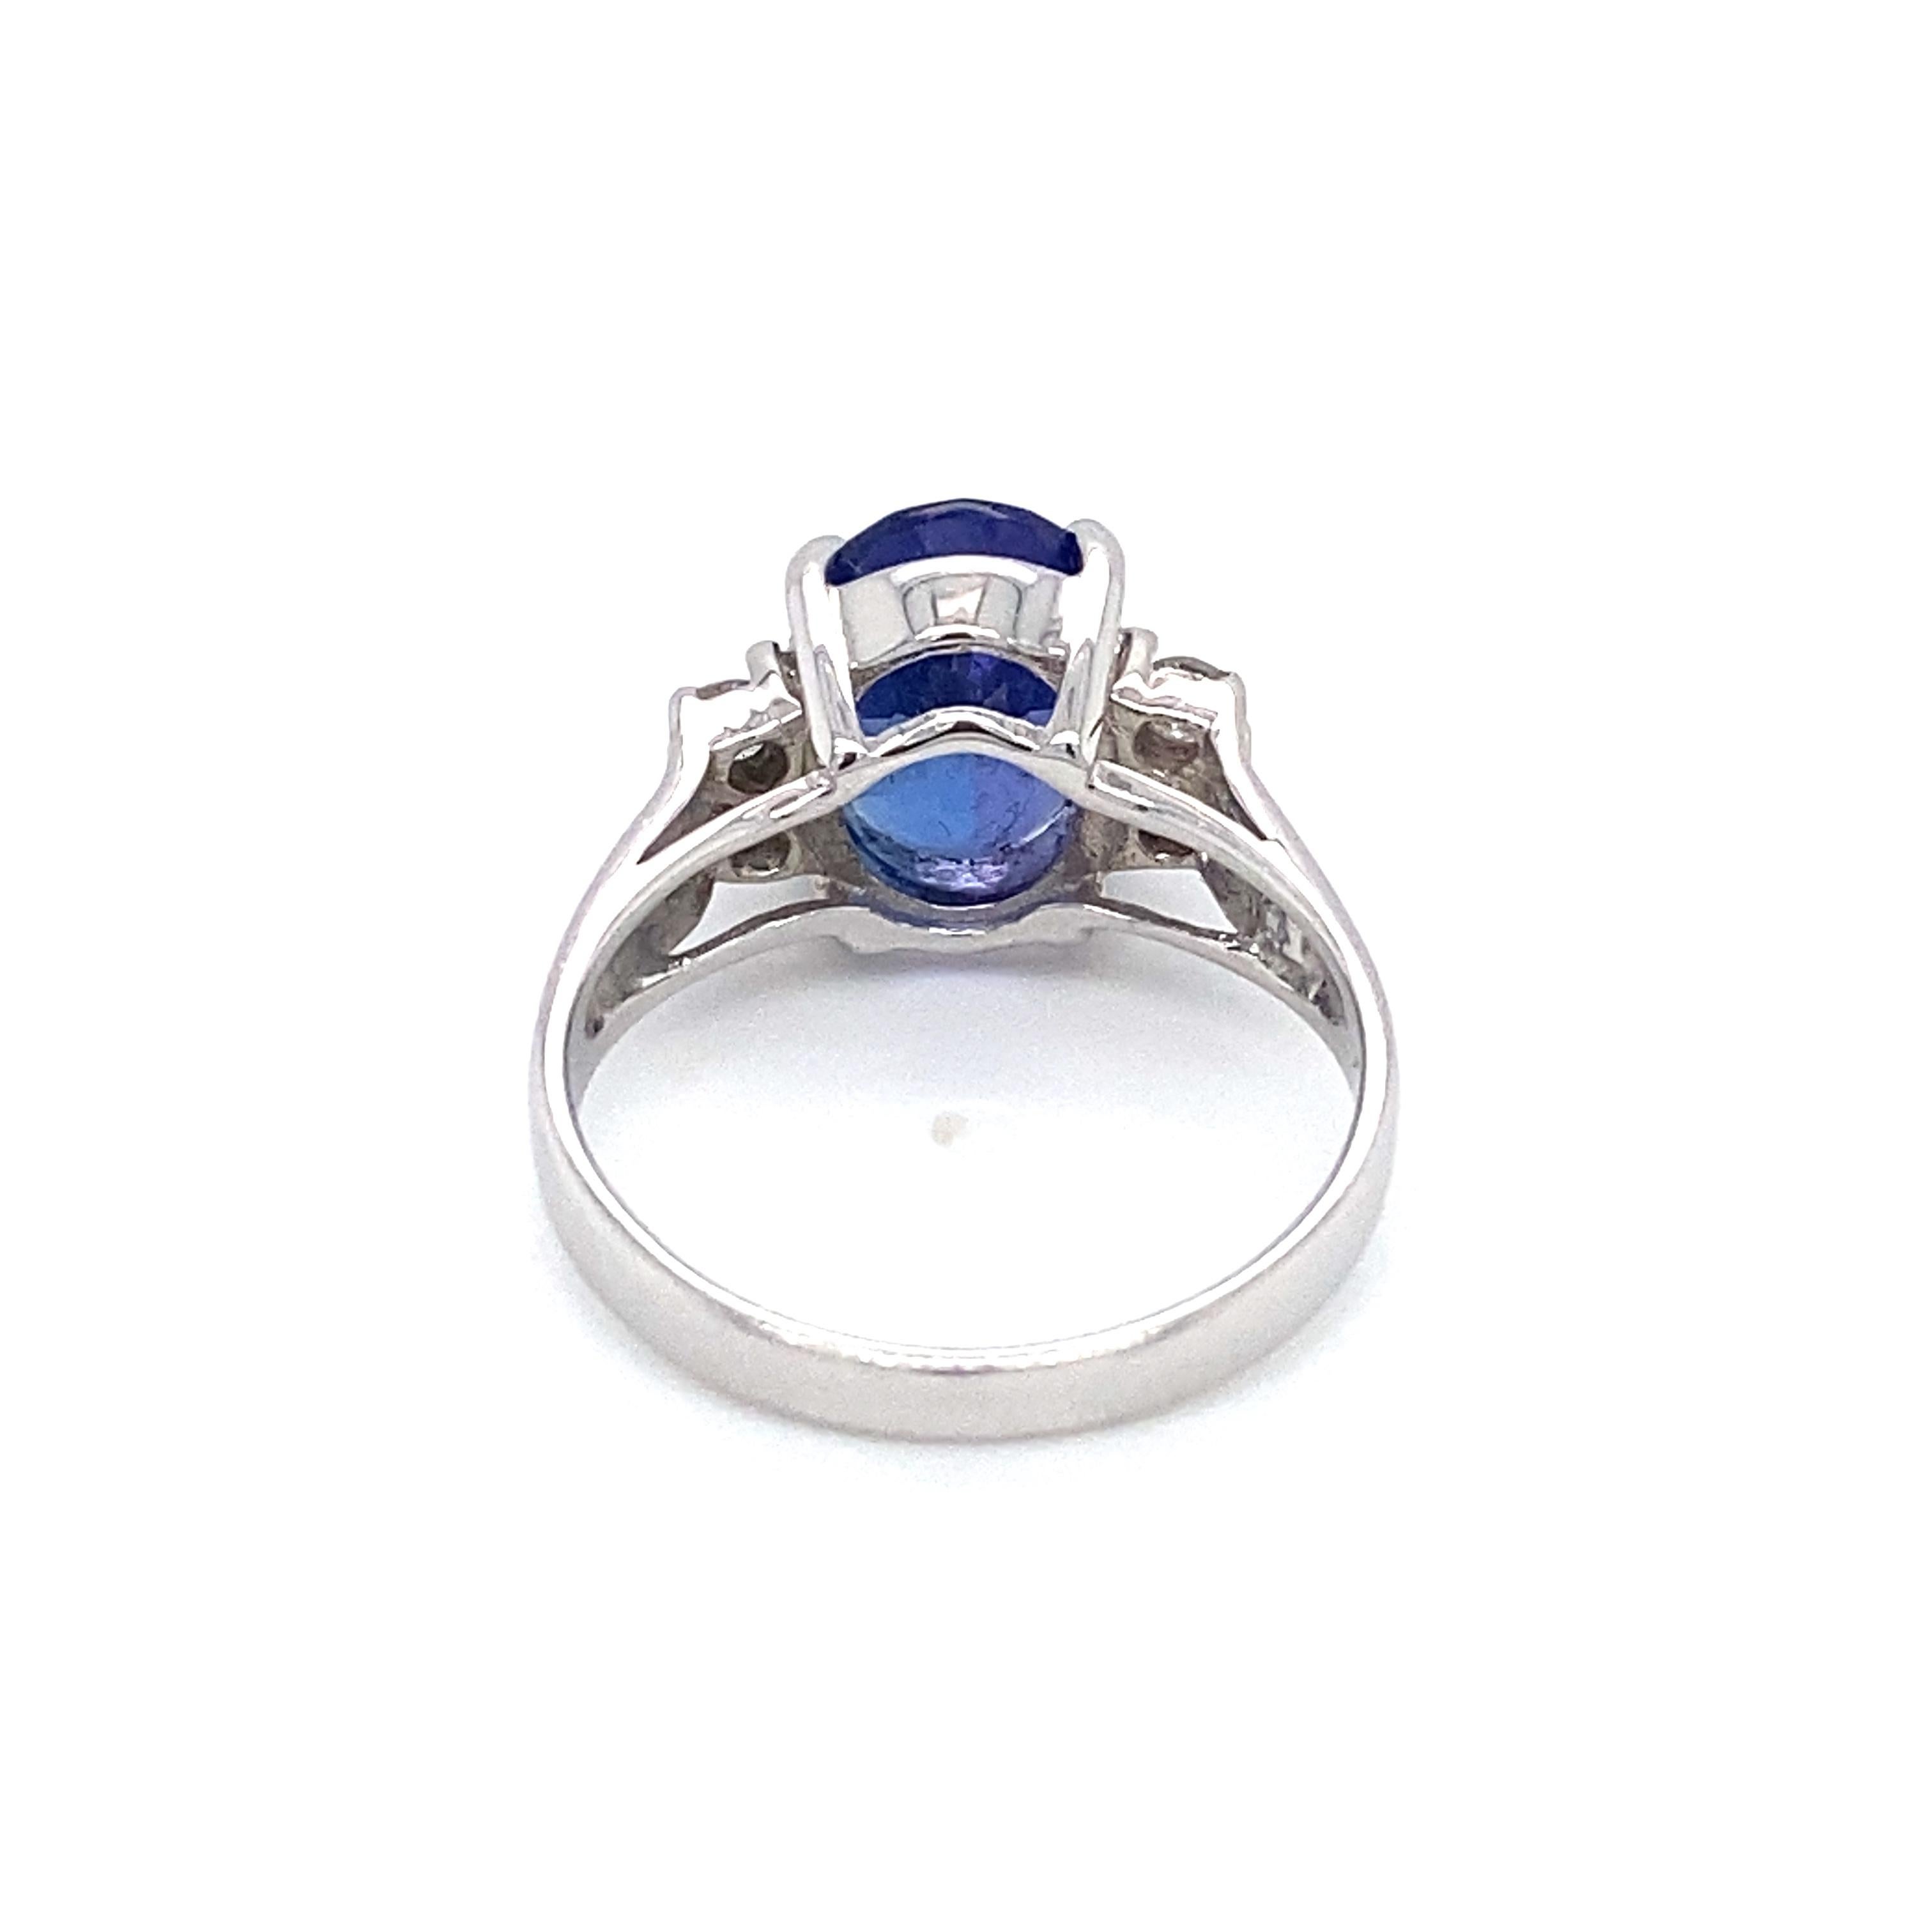 Item Details: This ring by Le Vian has a AAA quality tanzanite with accent diamonds.

Circa: 2000s
Metal Type: 14 Karat White Gold 
Weight: 3.8g
Size: US 6.75, resizable

Diamond Details:

Carat: 0.10 carat total weight
Cut: Round
Color: G
Clarity: